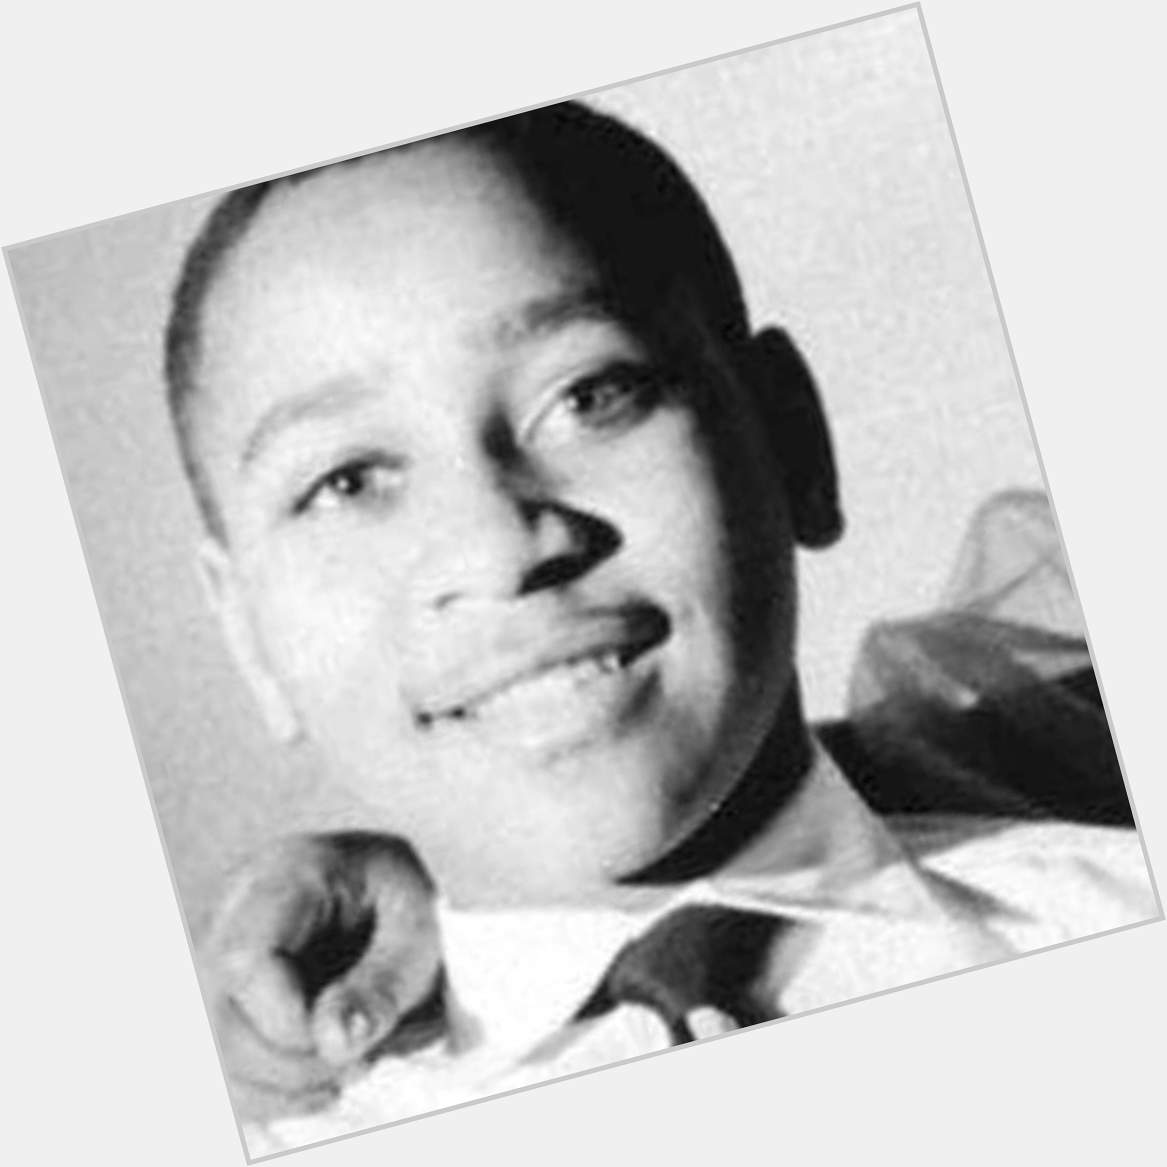 Happy Birthday Emmett Till !!! RIP.
Never forget what hate can do... 